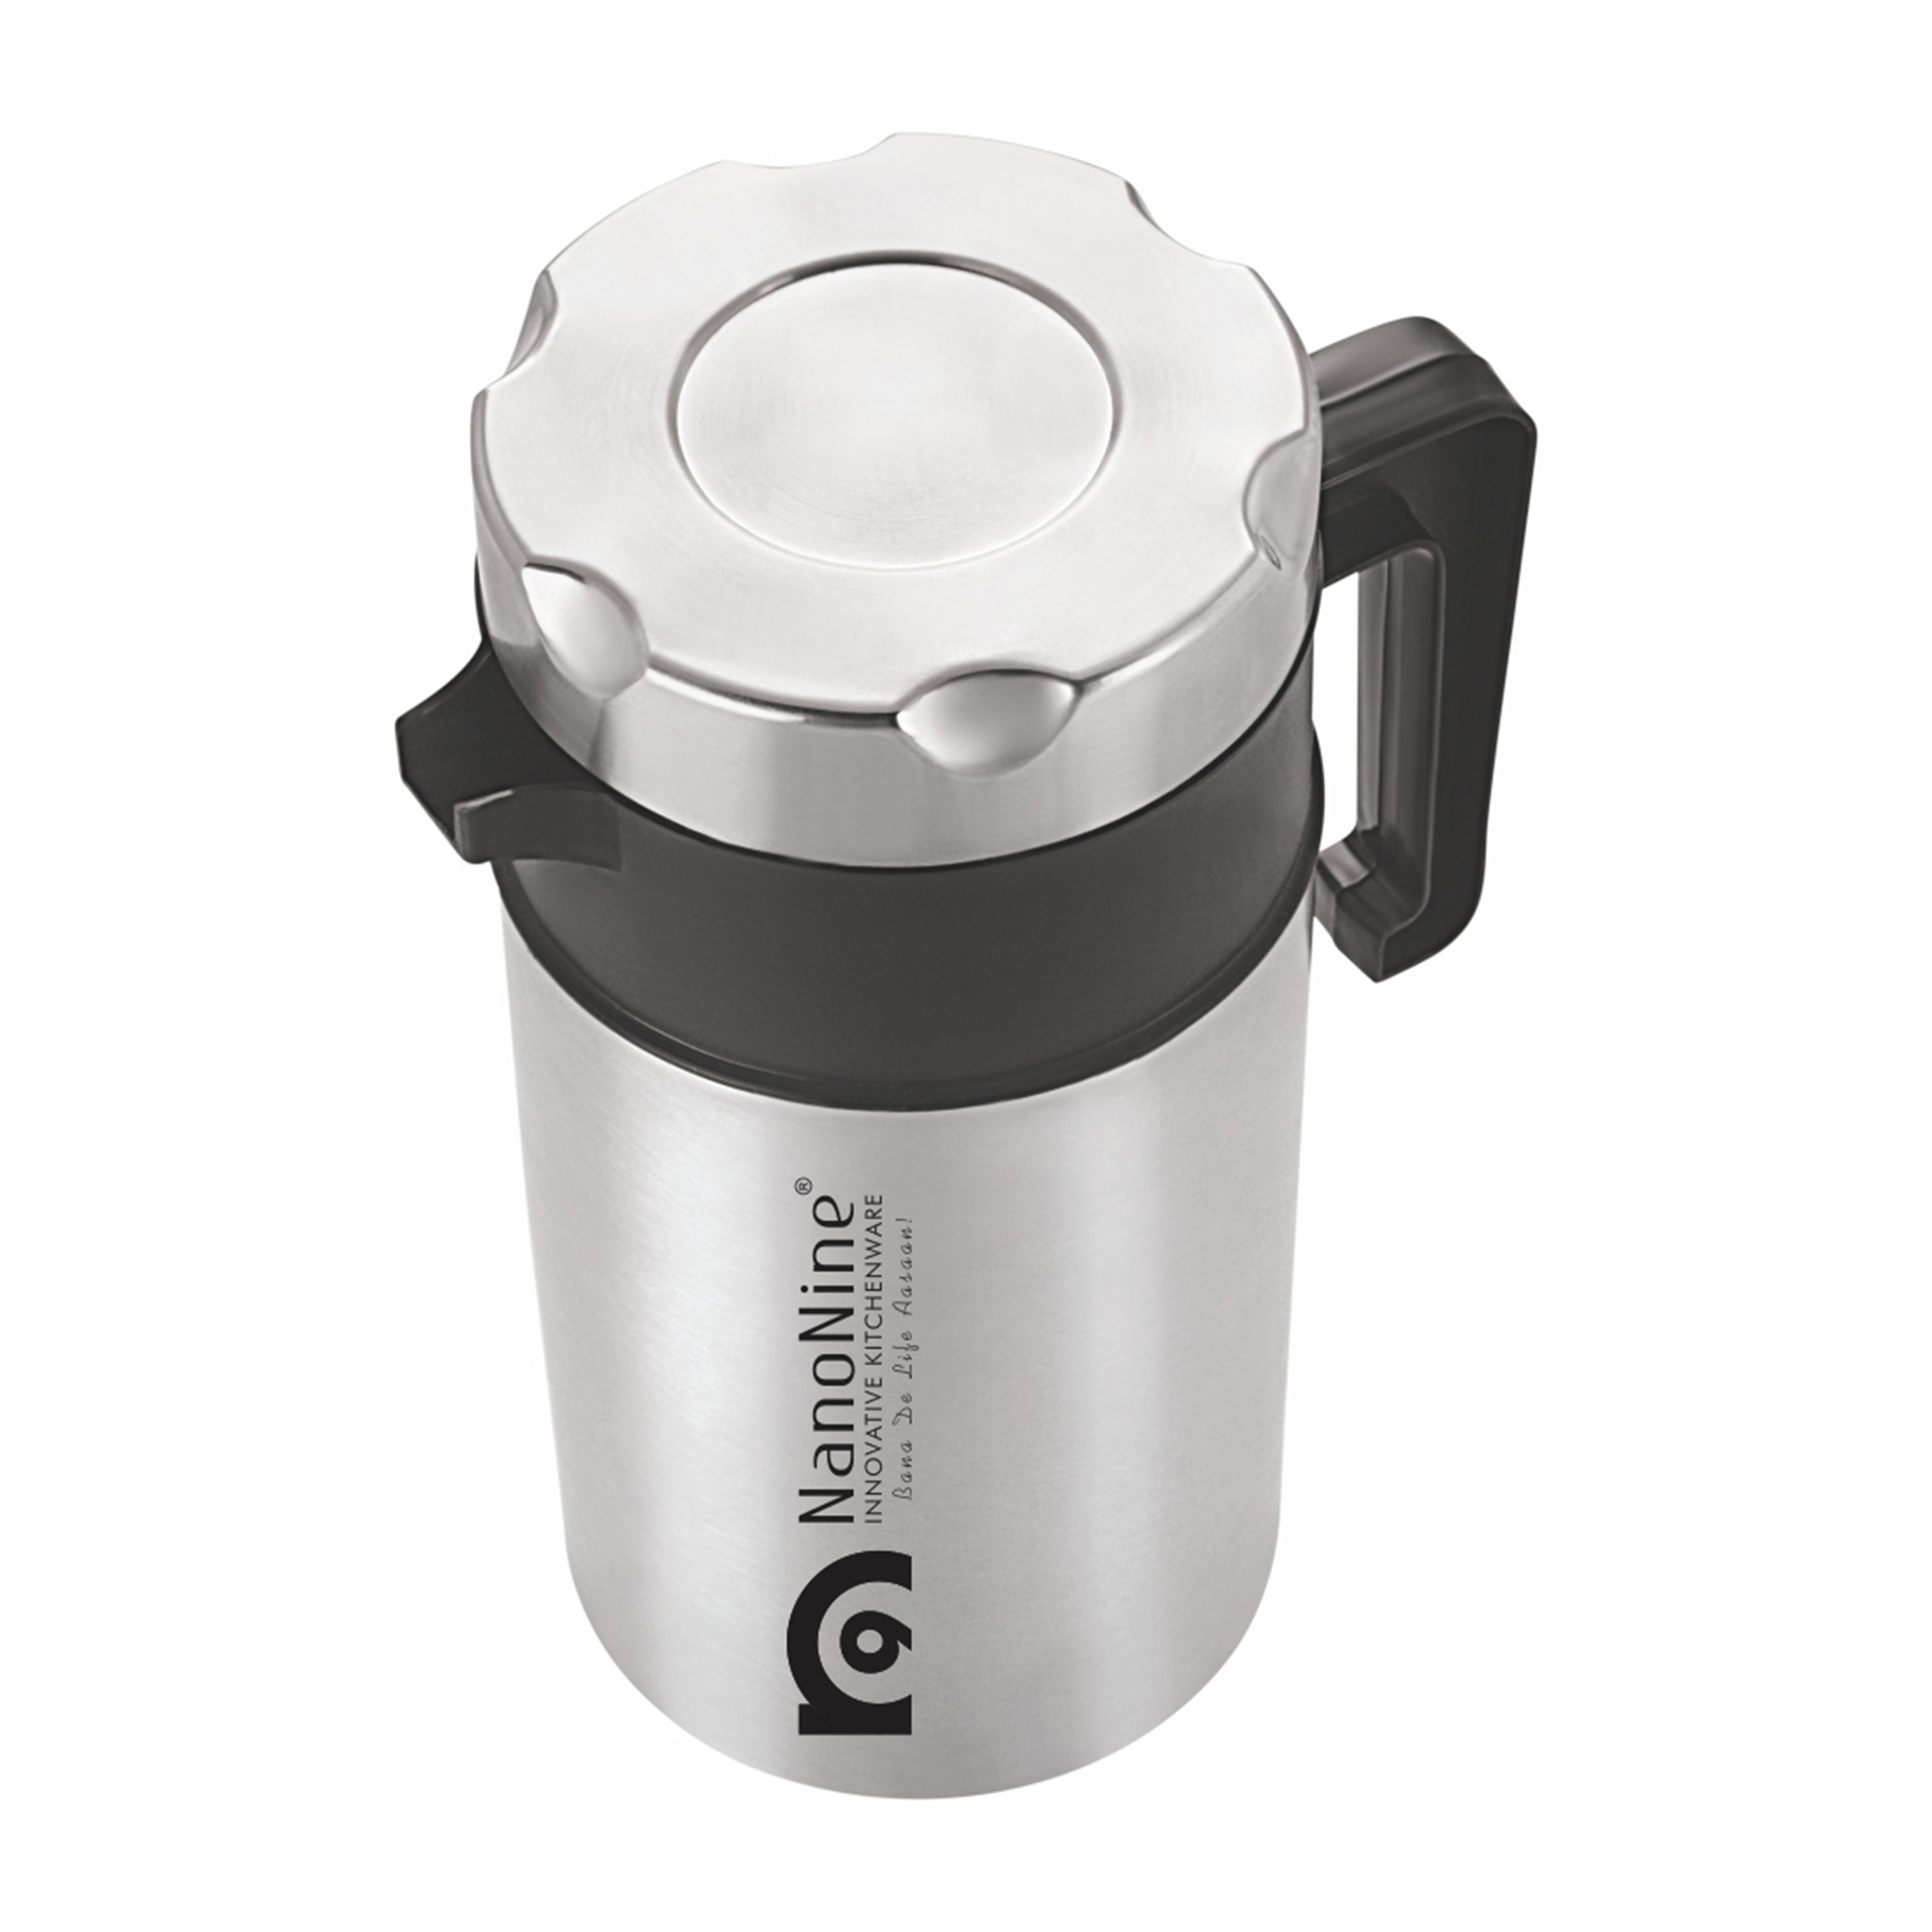 NanoNine T-Pot 700 ml Double Wall Insulated Stainless Steel Flask.